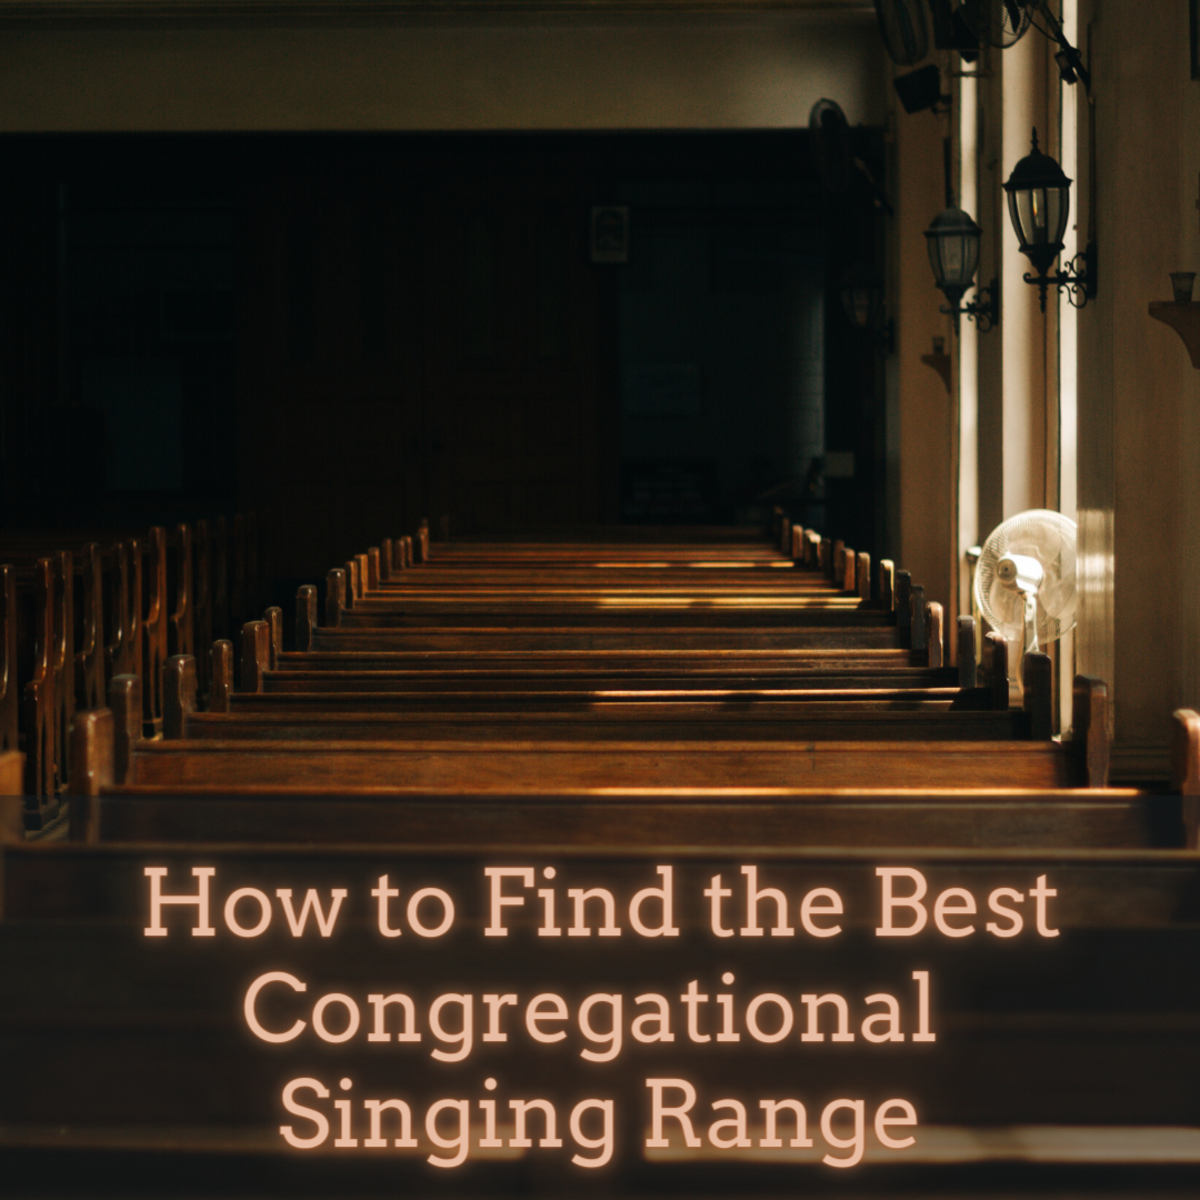 Learn how to find the best singing range for your congregation!